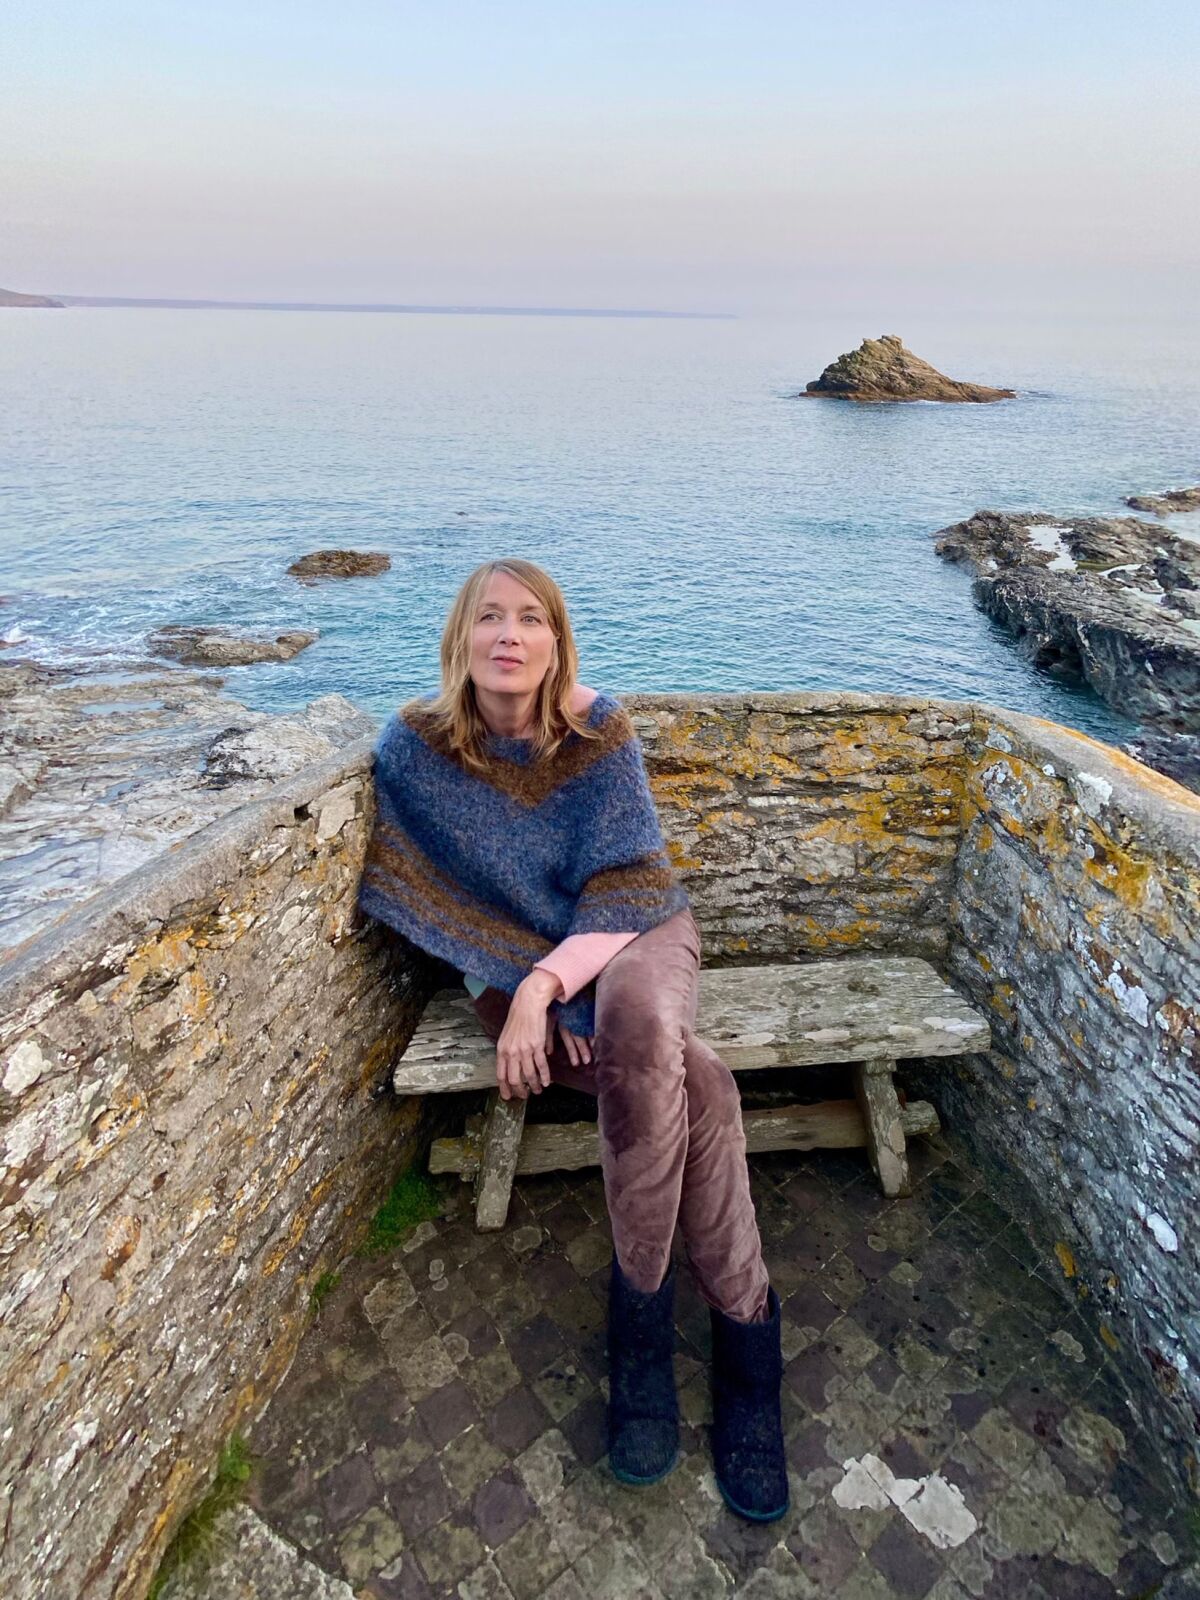 Kari Howard at Prussia Cove, Penzance, on the Cornwall coast in England in 2020.